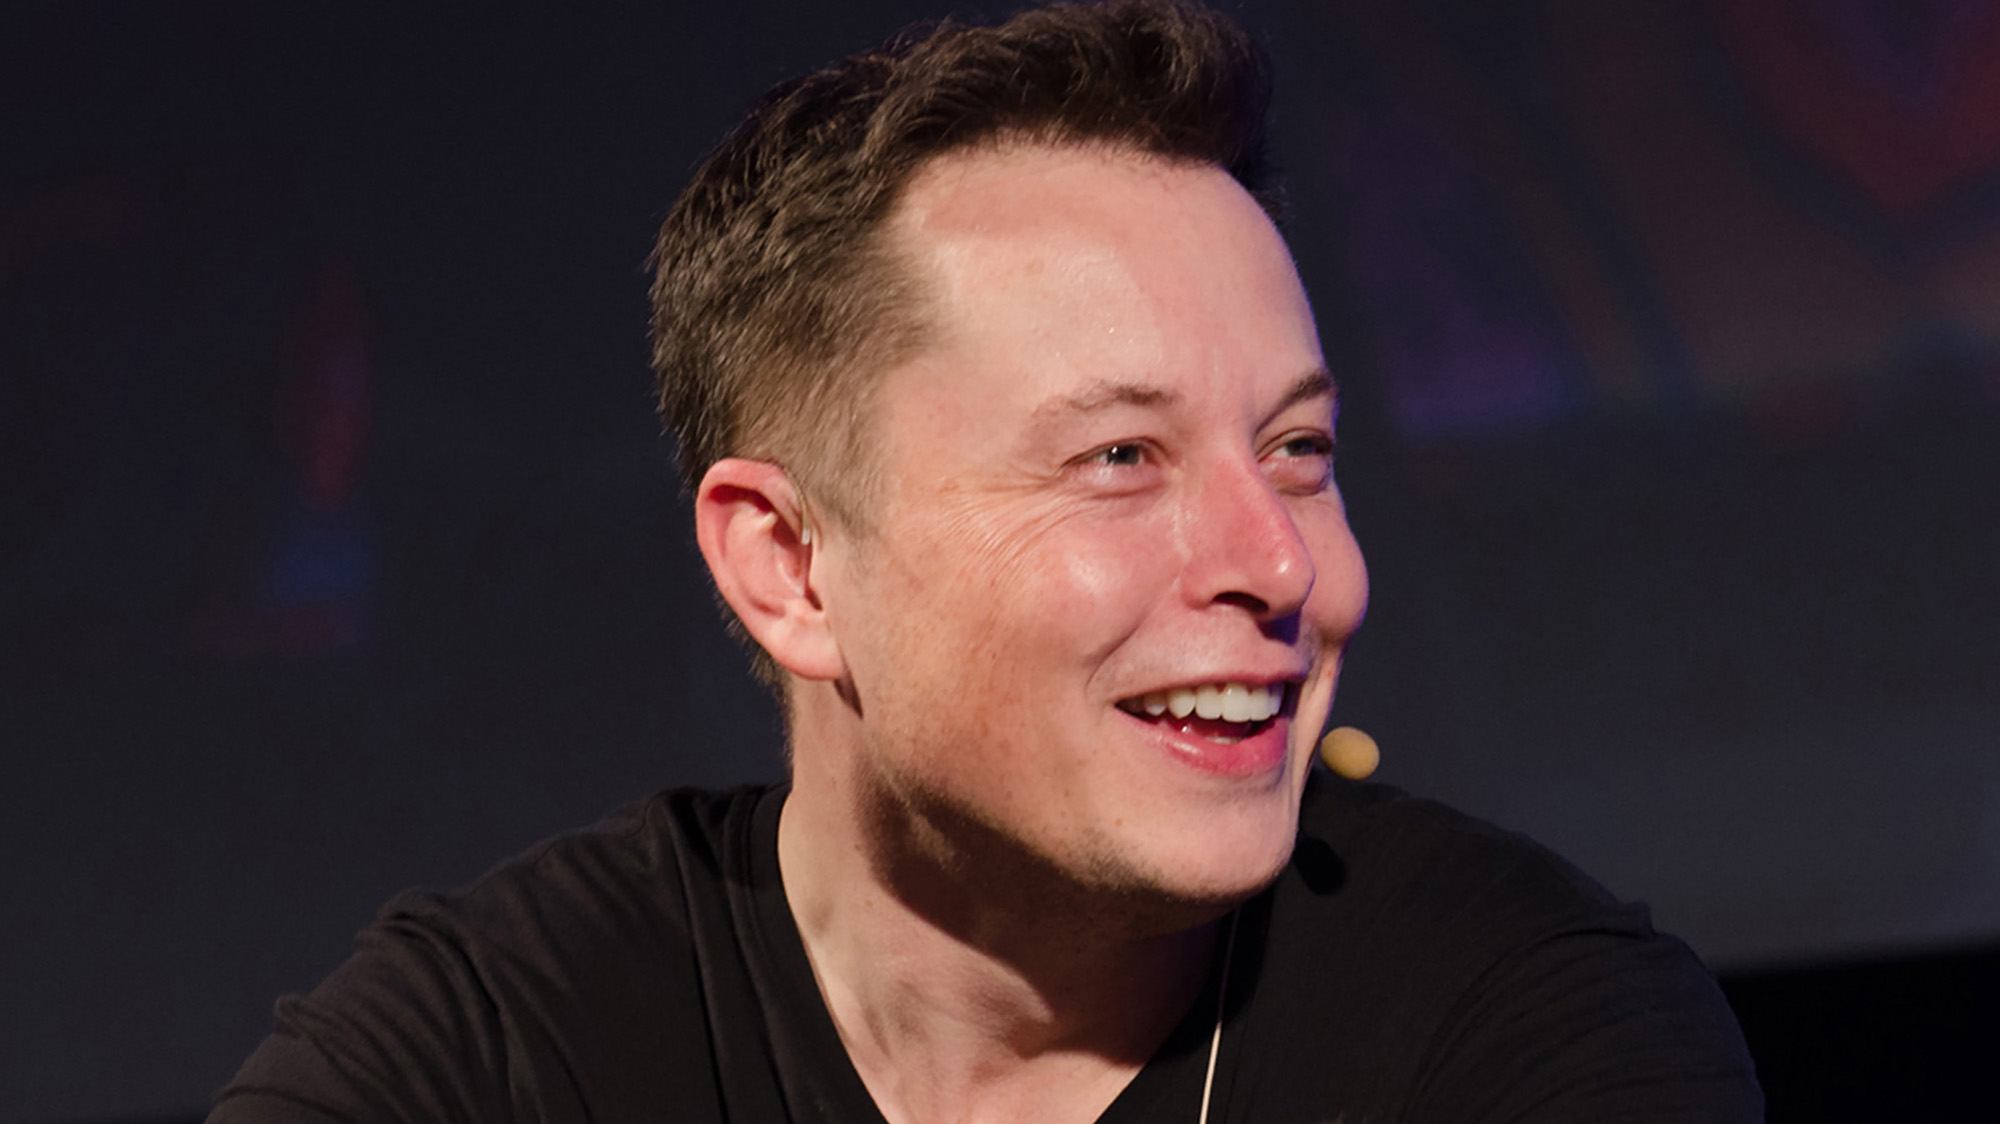 ex-spacex-employees-allege-illegal-firings-by-elon-musk-in-new-lawsuit